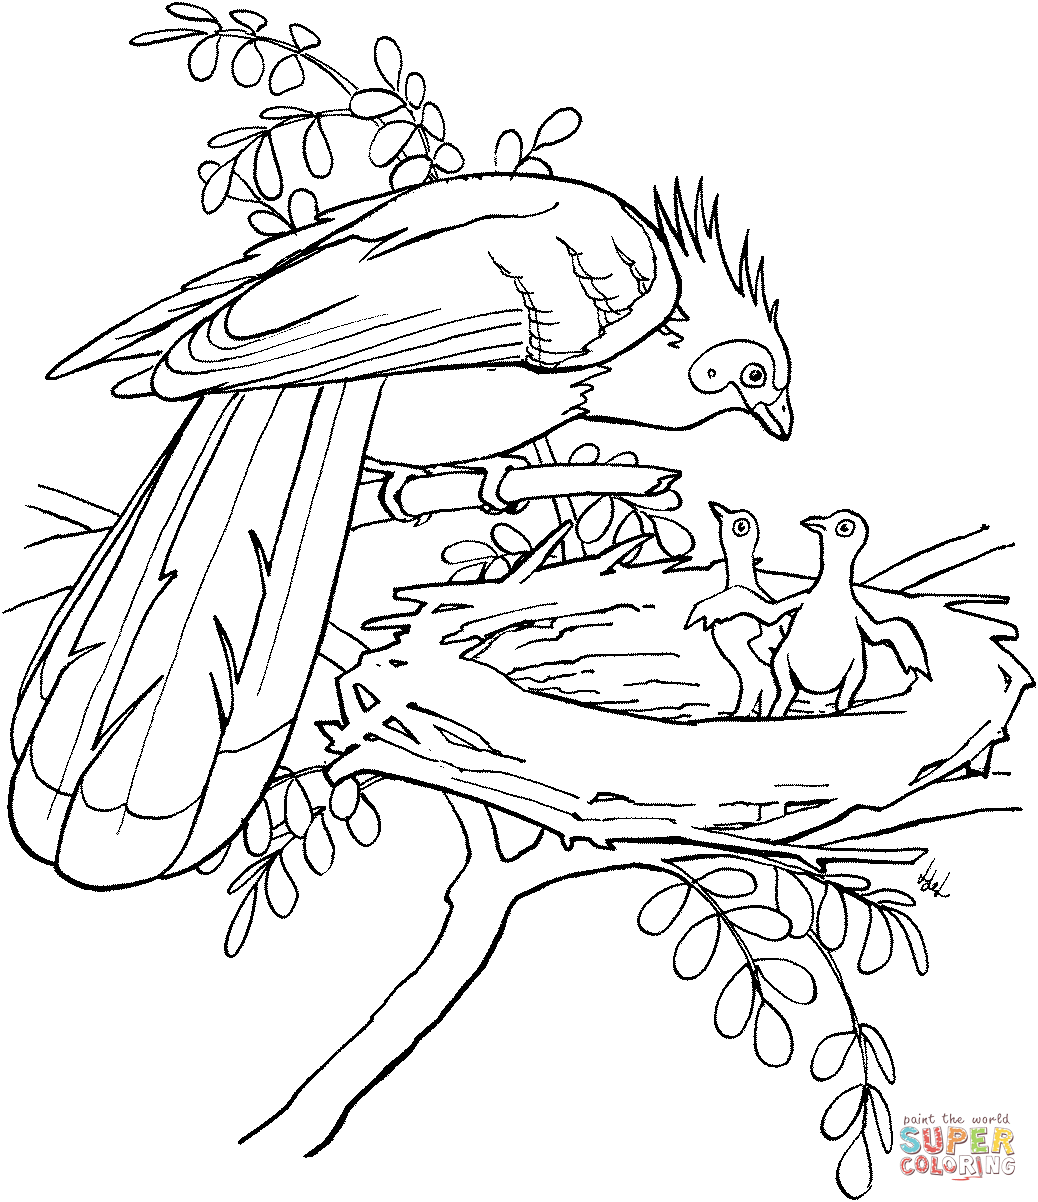 Amazon Rainforest Animals Coloring Pages   Free Printable Pictures ...